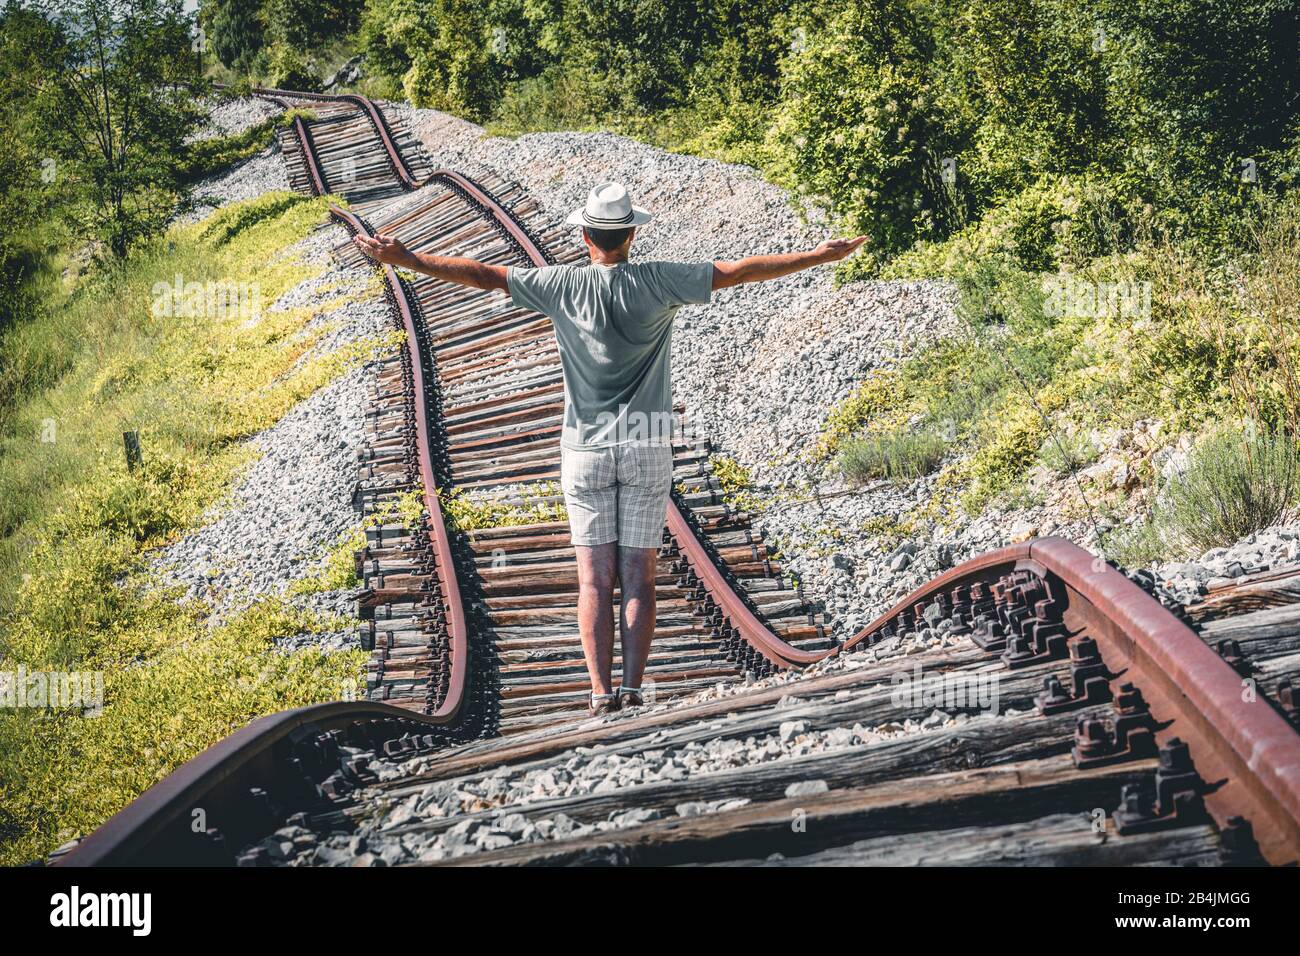 man with a white hat in the middle of abandoned rails seems to want to stop an imaginary train, Pijana pruga, Kozljak, Krsan, Istria County, Croatia Stock Photo